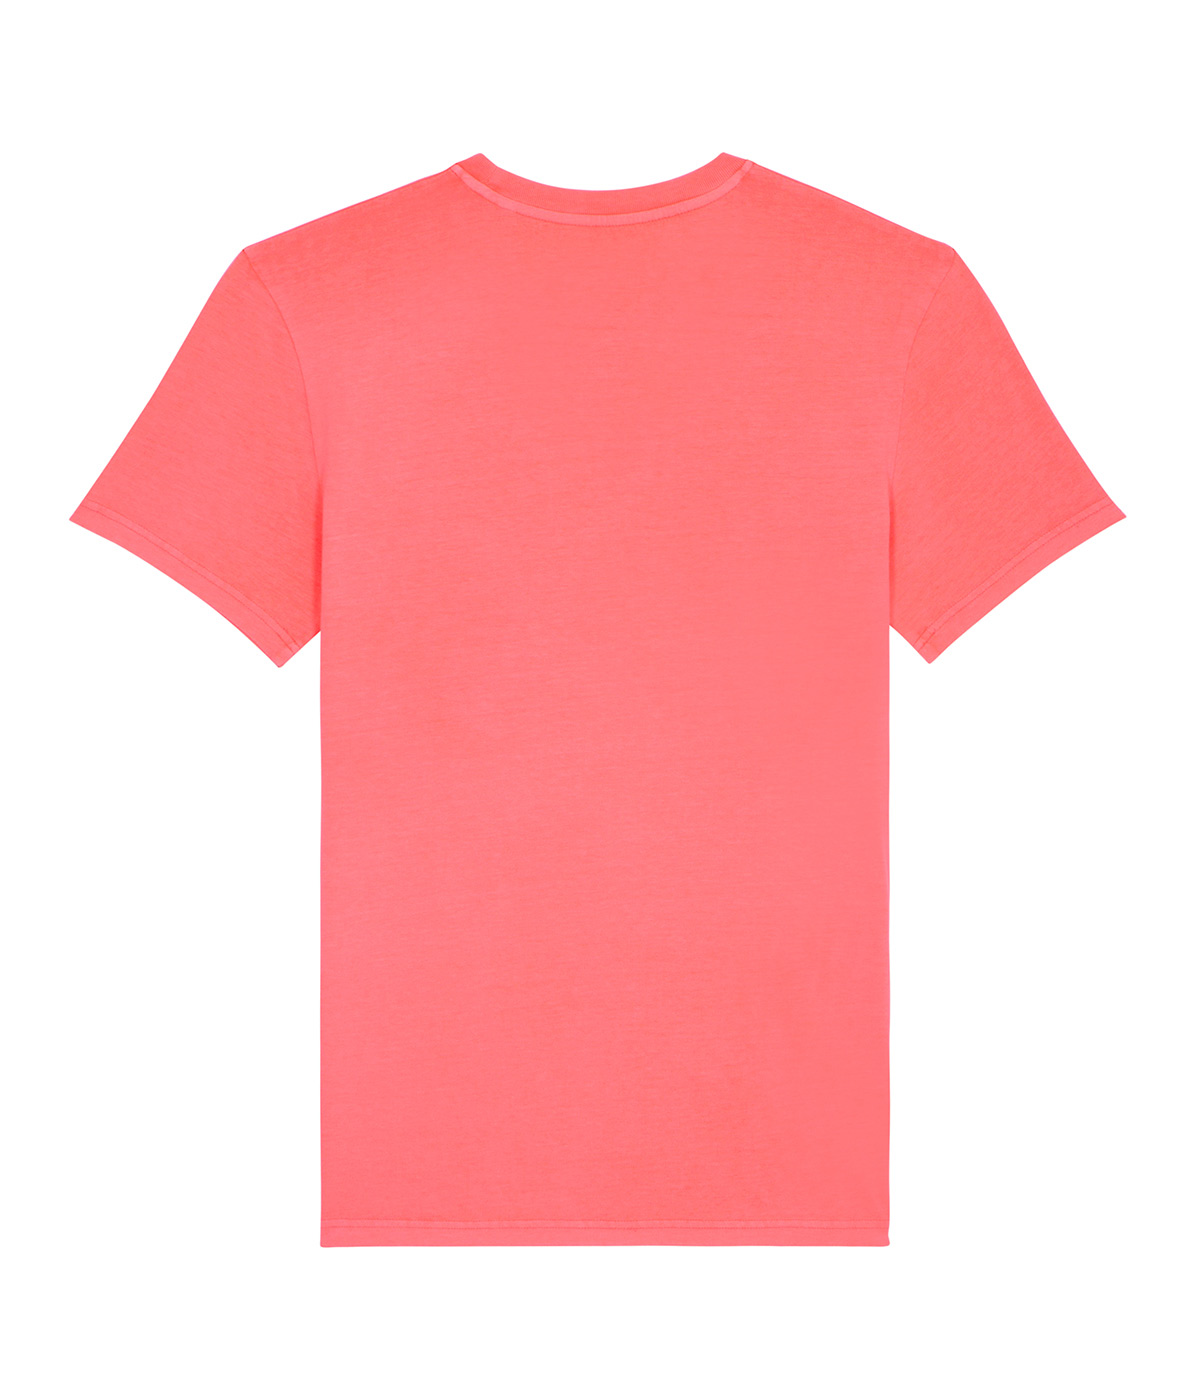 Back of pink cotton t-shirt with round neck and short sleeves.